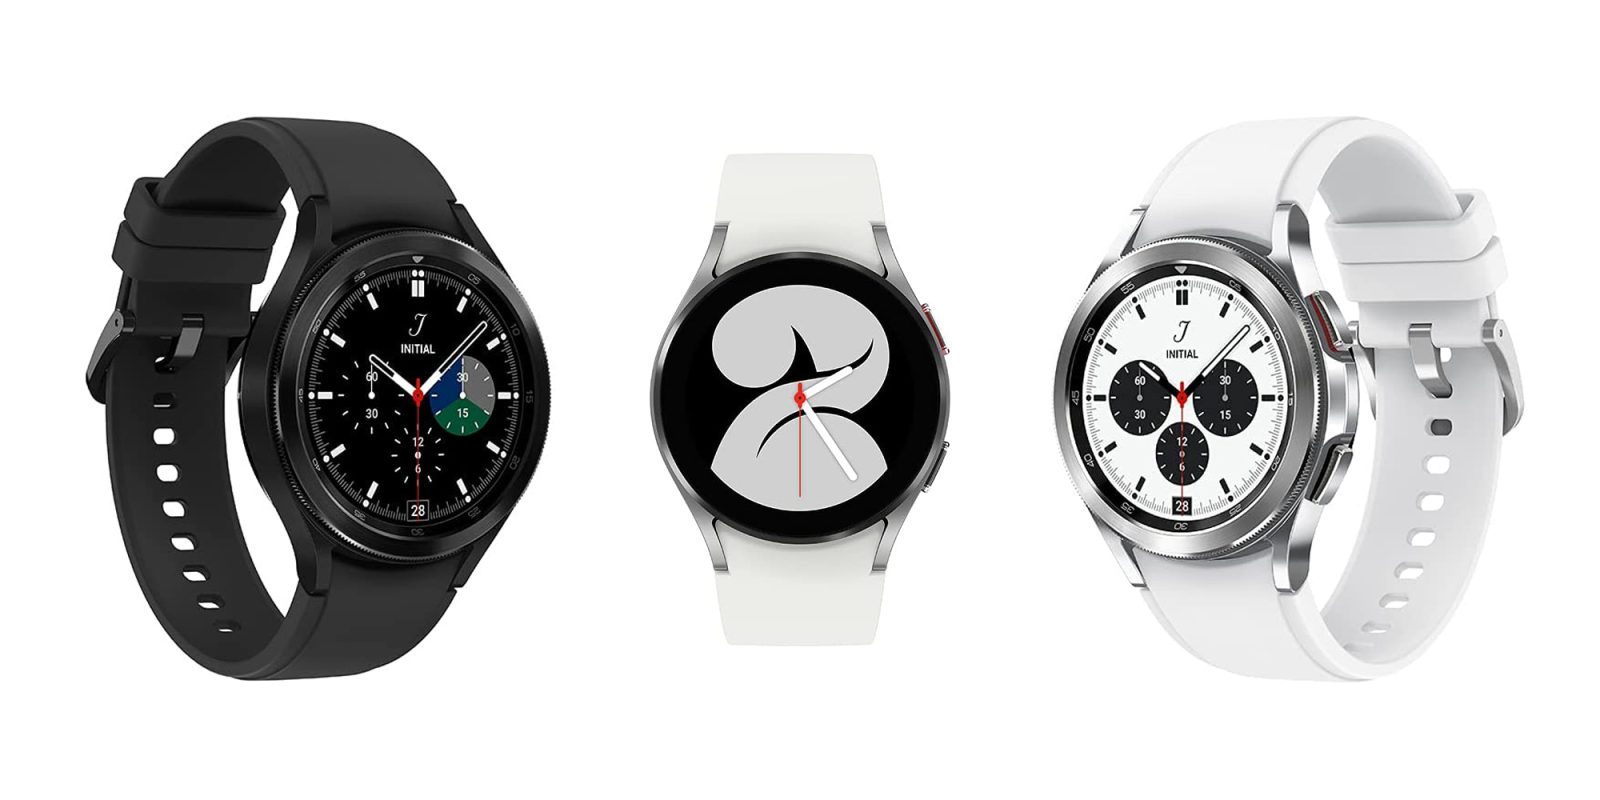 Galaxy Watch price leaked by early Amazon listing - 9to5Google